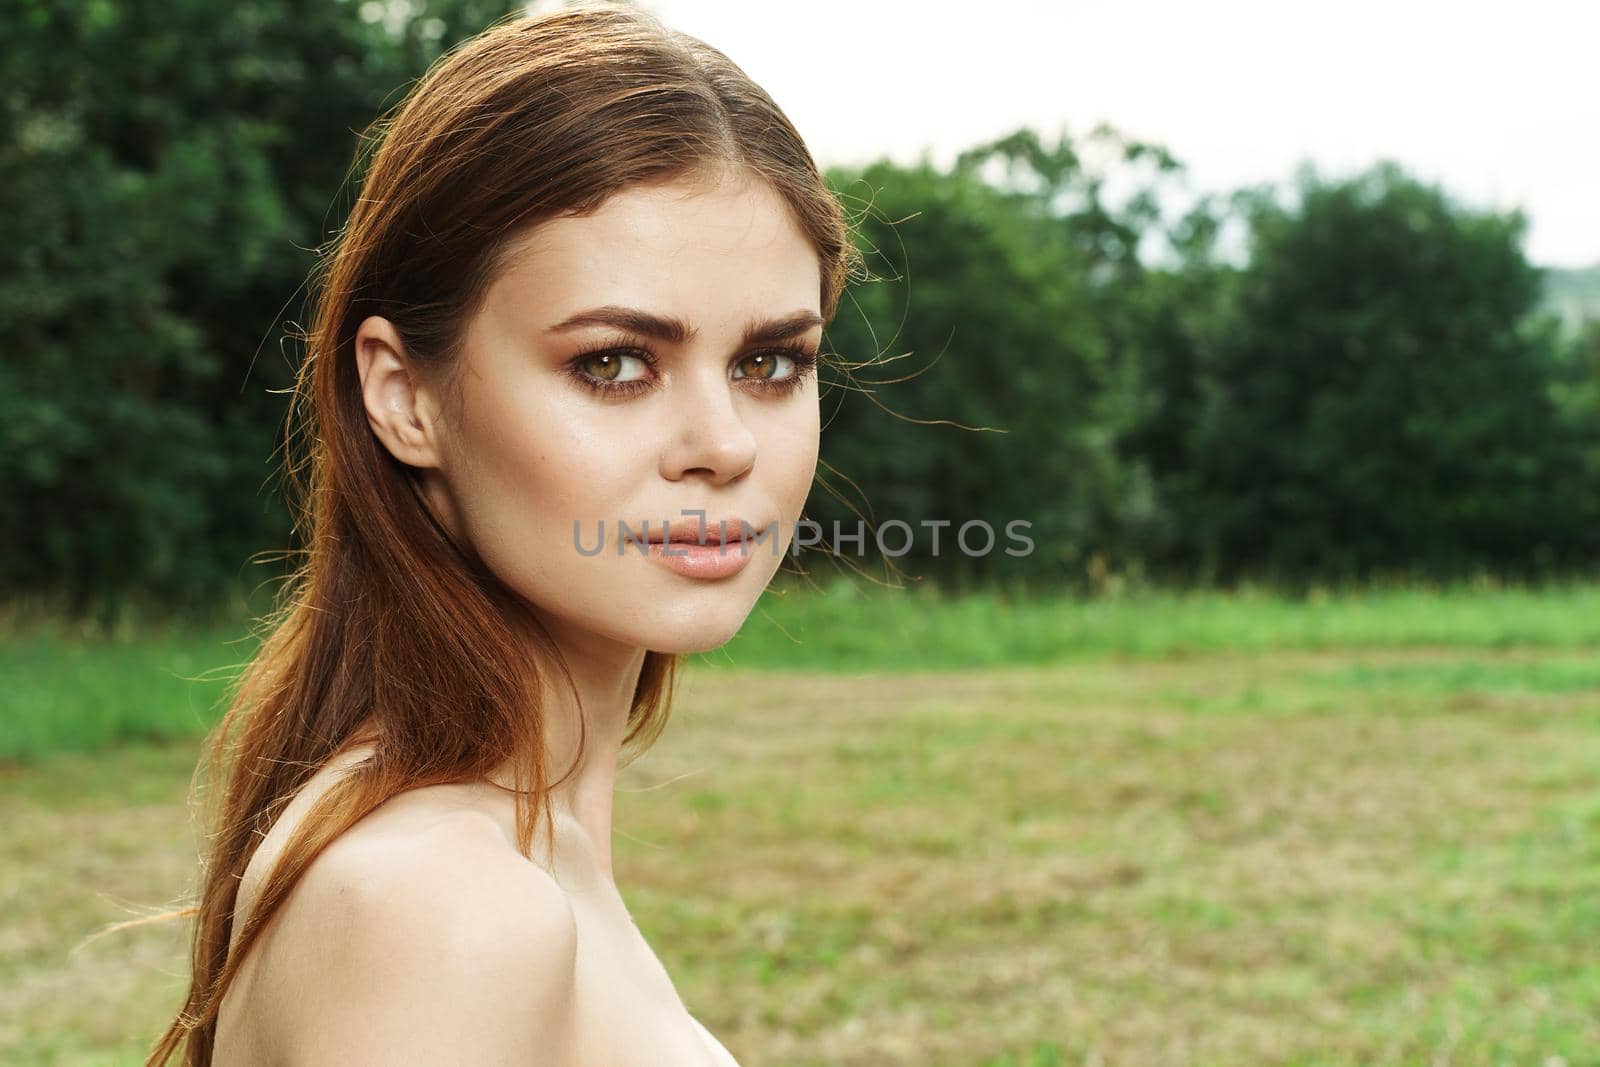 beautiful woman Cosmetology nature green leaves glamor model. High quality photo